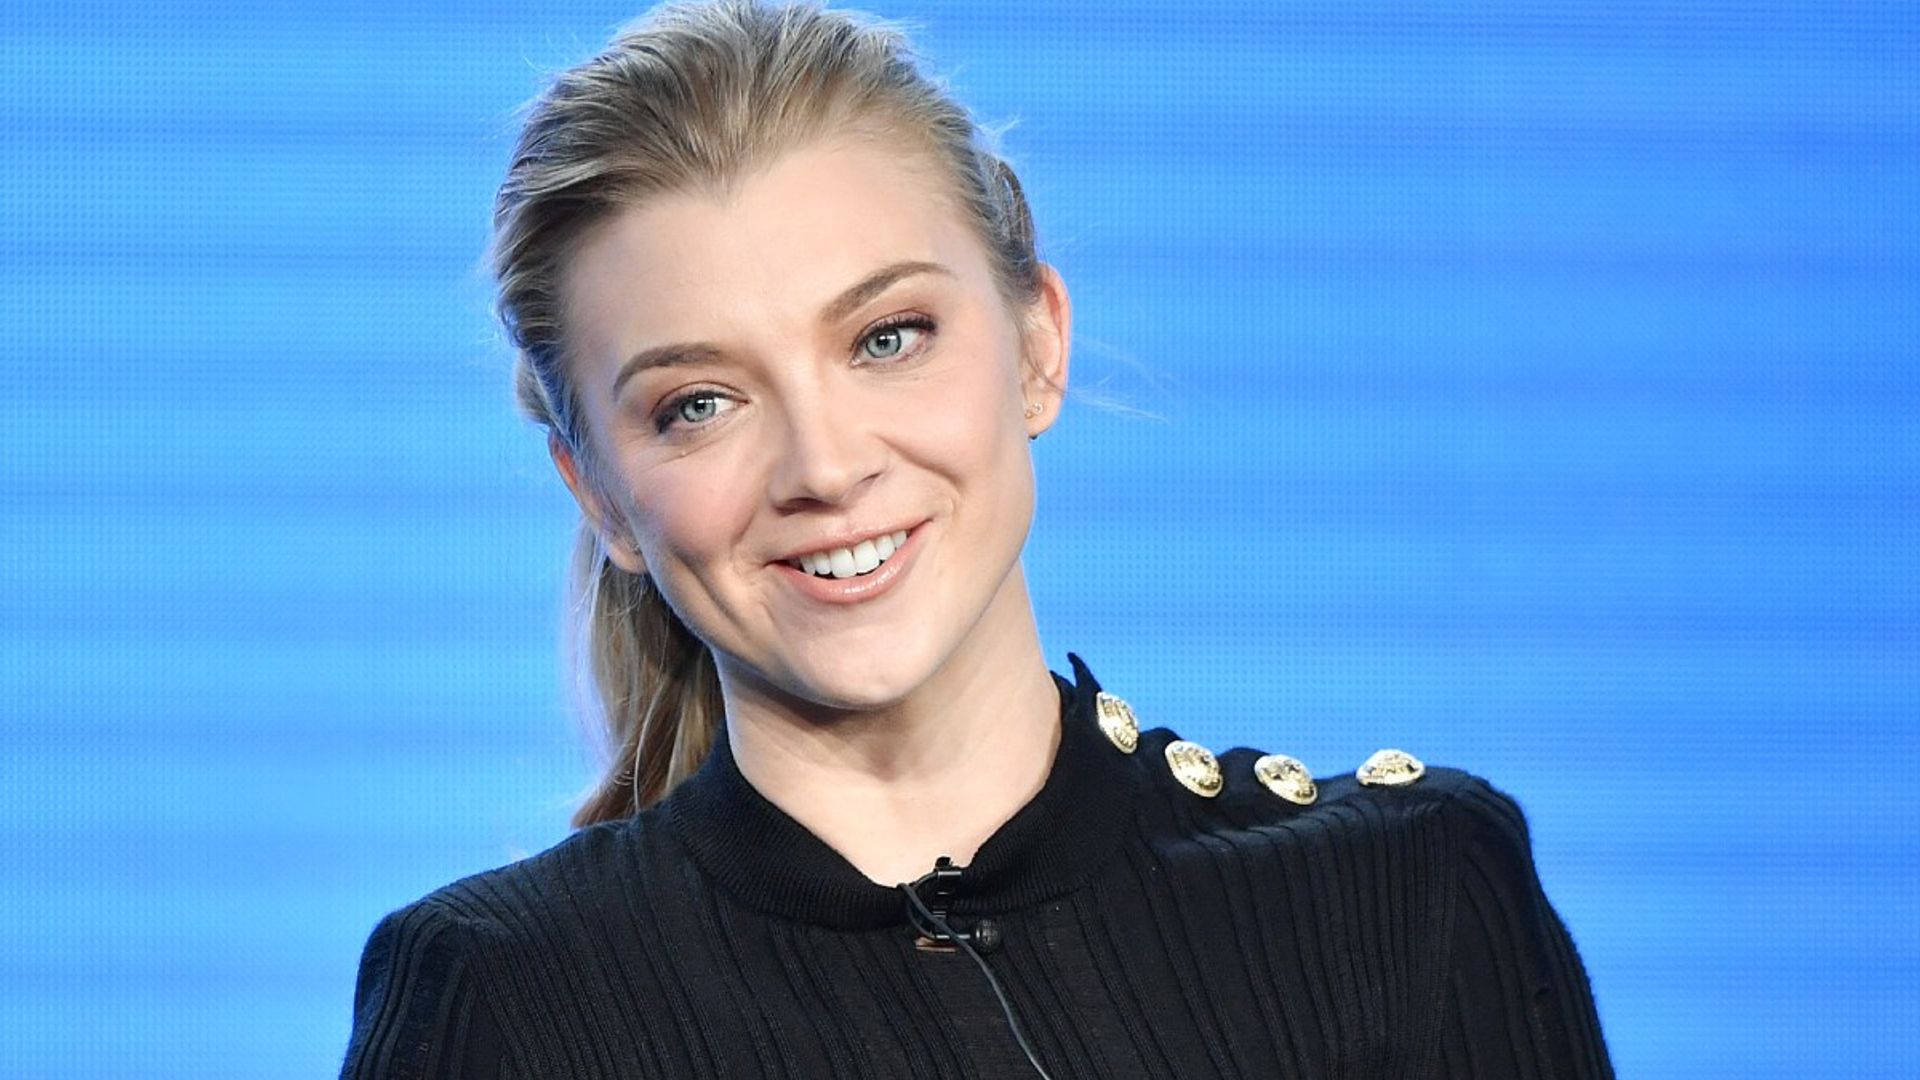 Game of Thrones star Natalie Dormer reveals incredible news after tough year